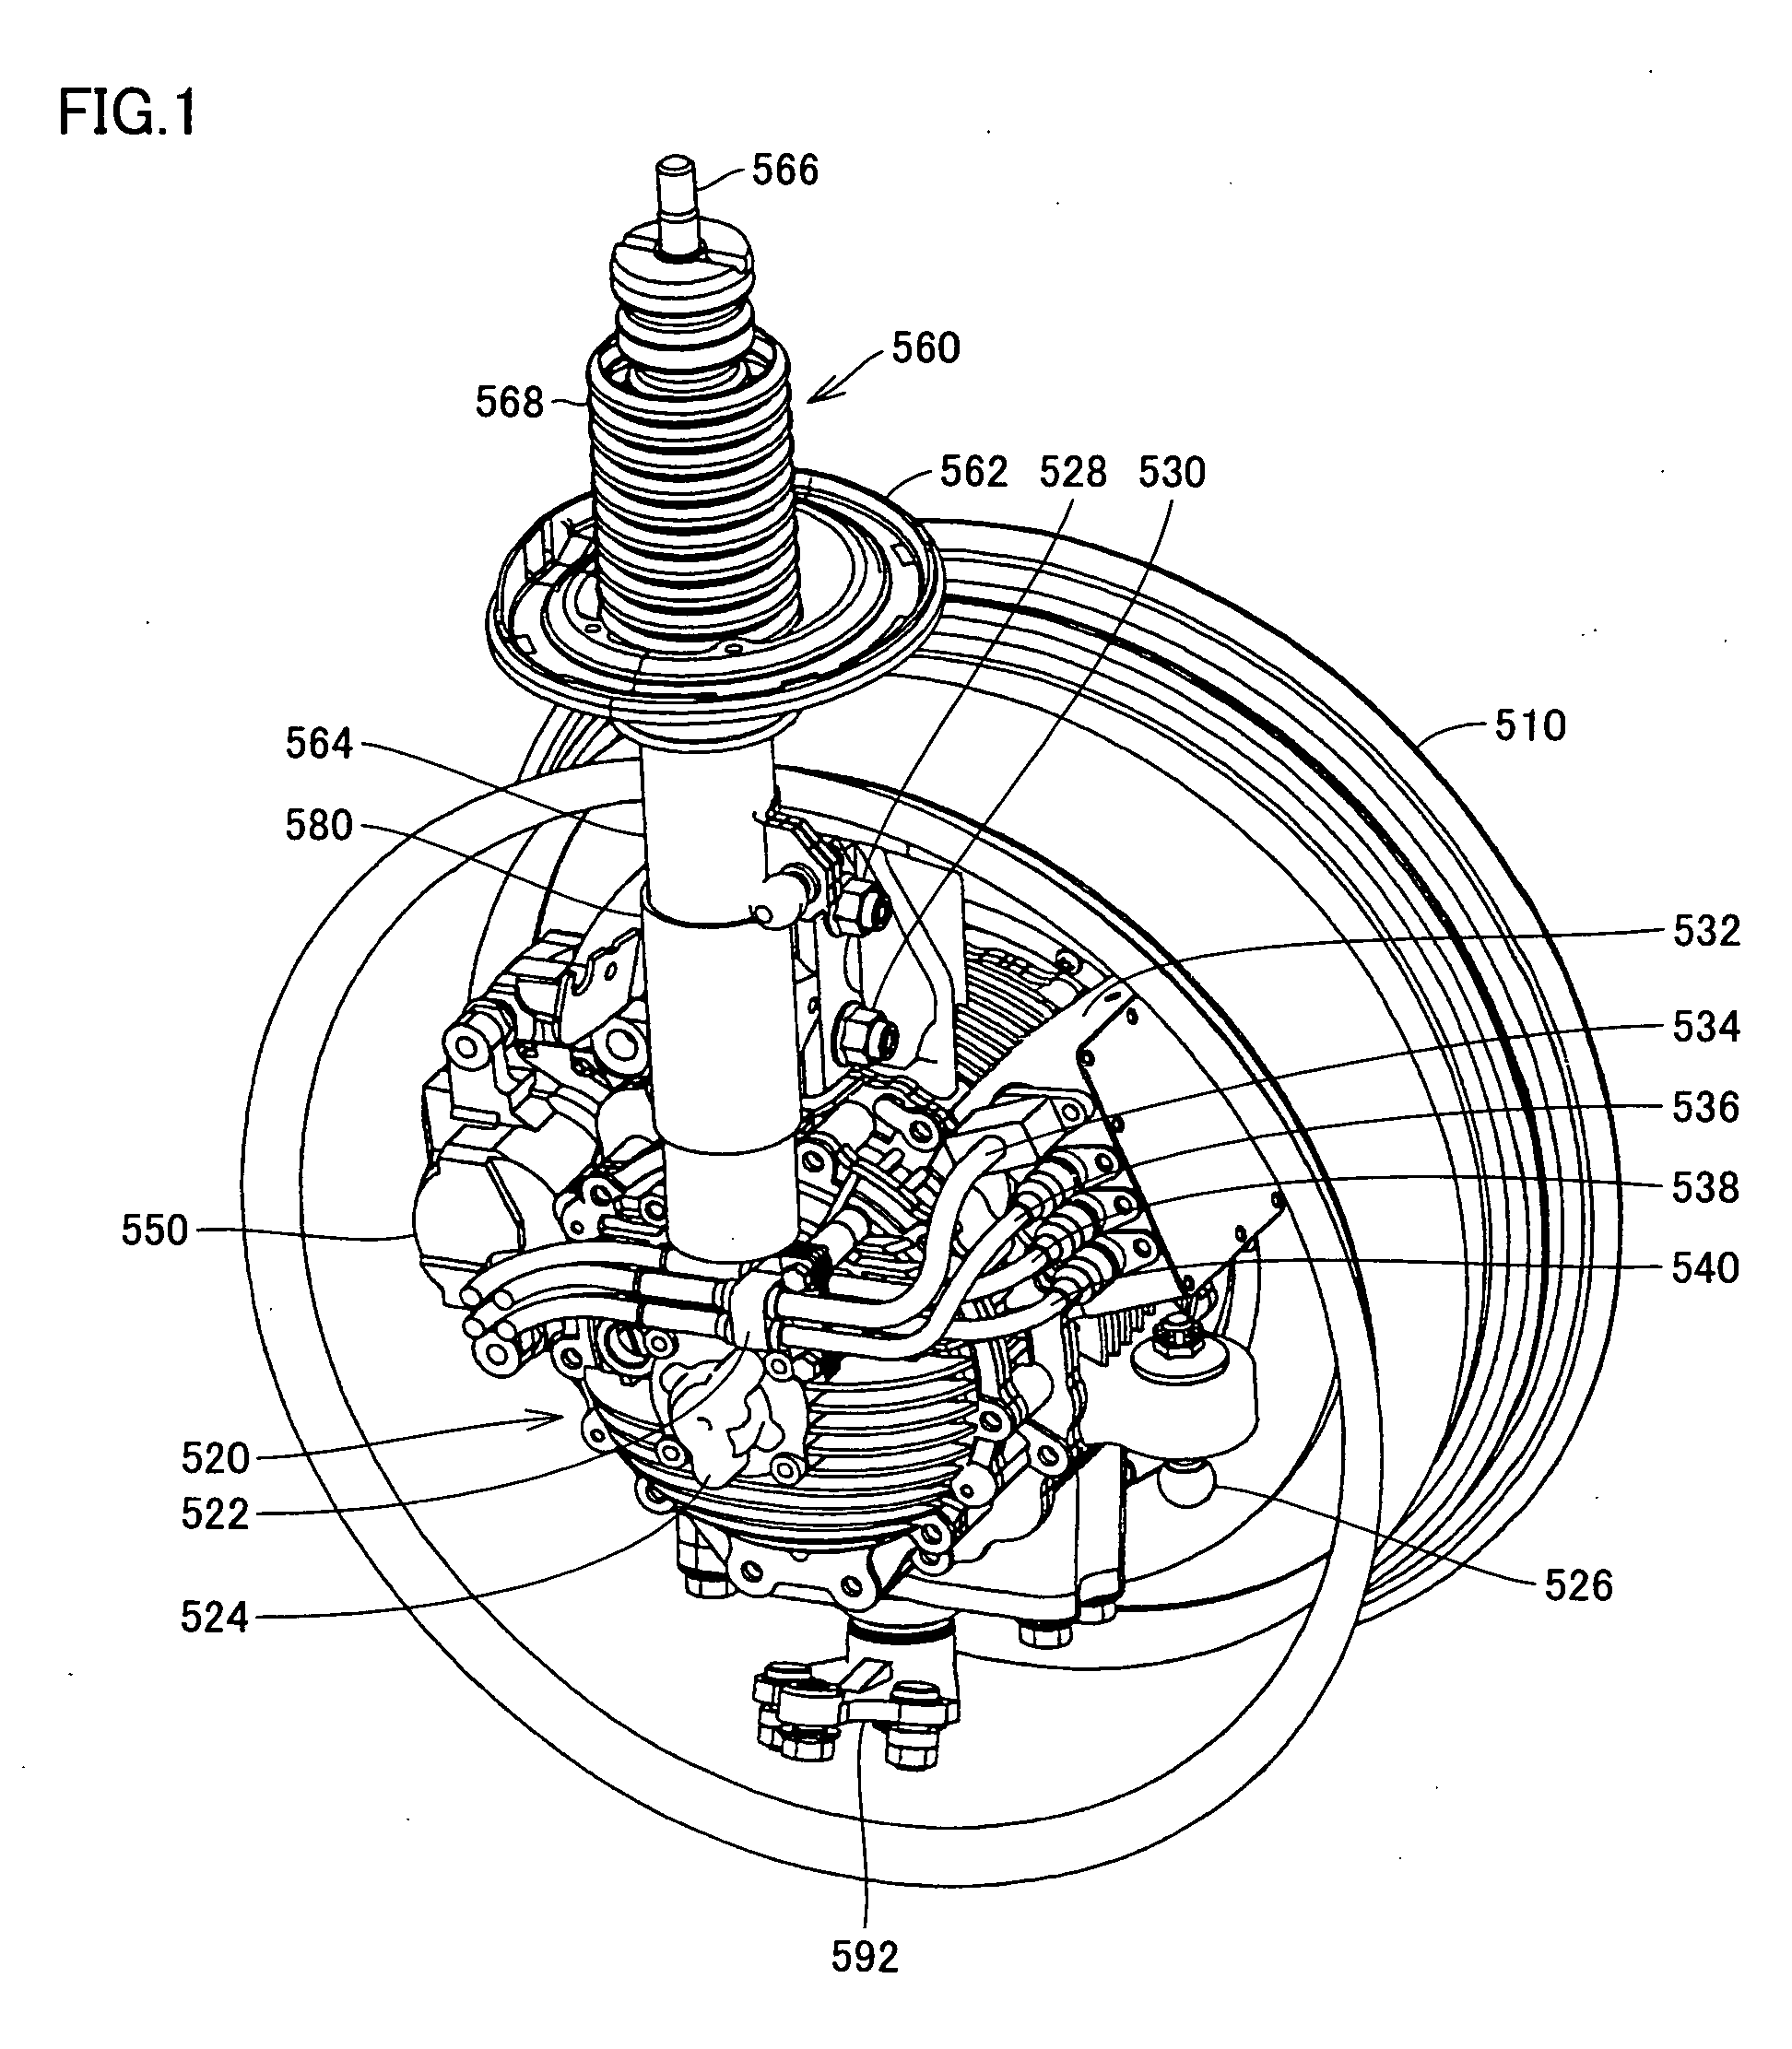 Driving unit for driving vehicle by motor